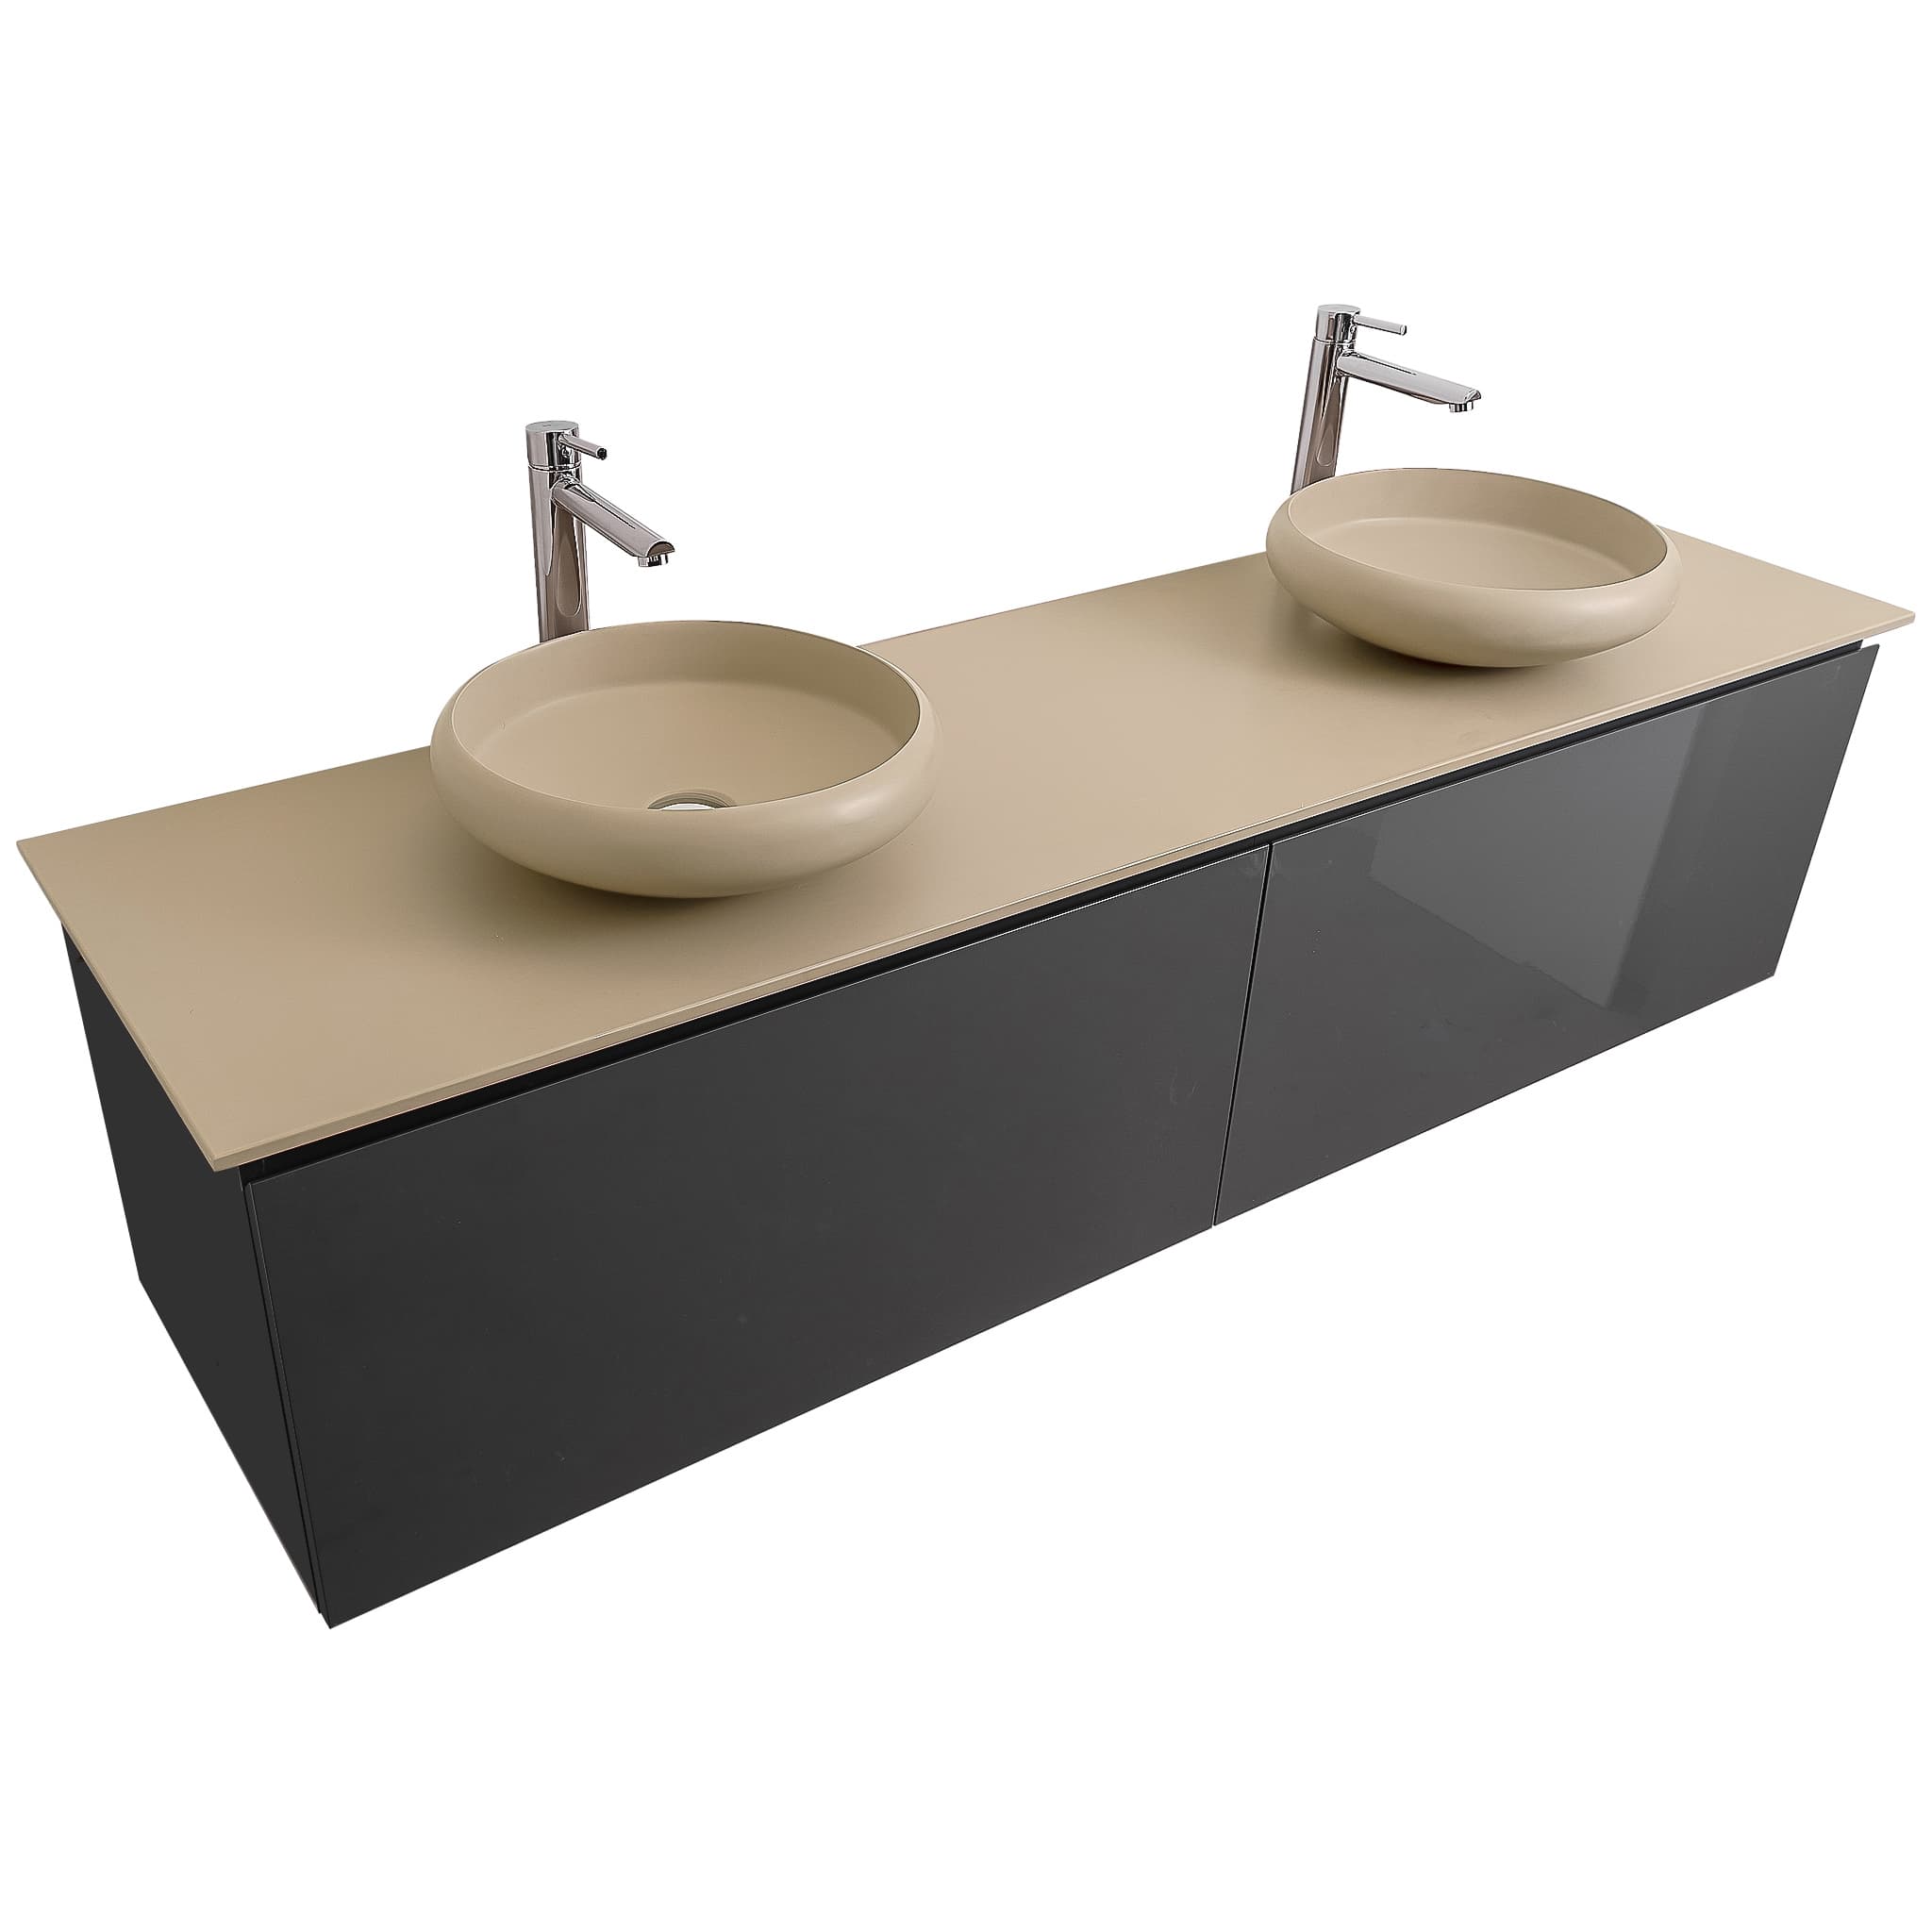 Venice 72 Anthracite High Gloss Cabinet, Solid Surface Flat Taupe Counter And Two Round Solid Surface Taupe Basin 1153, Wall Mounted Modern Vanity Set